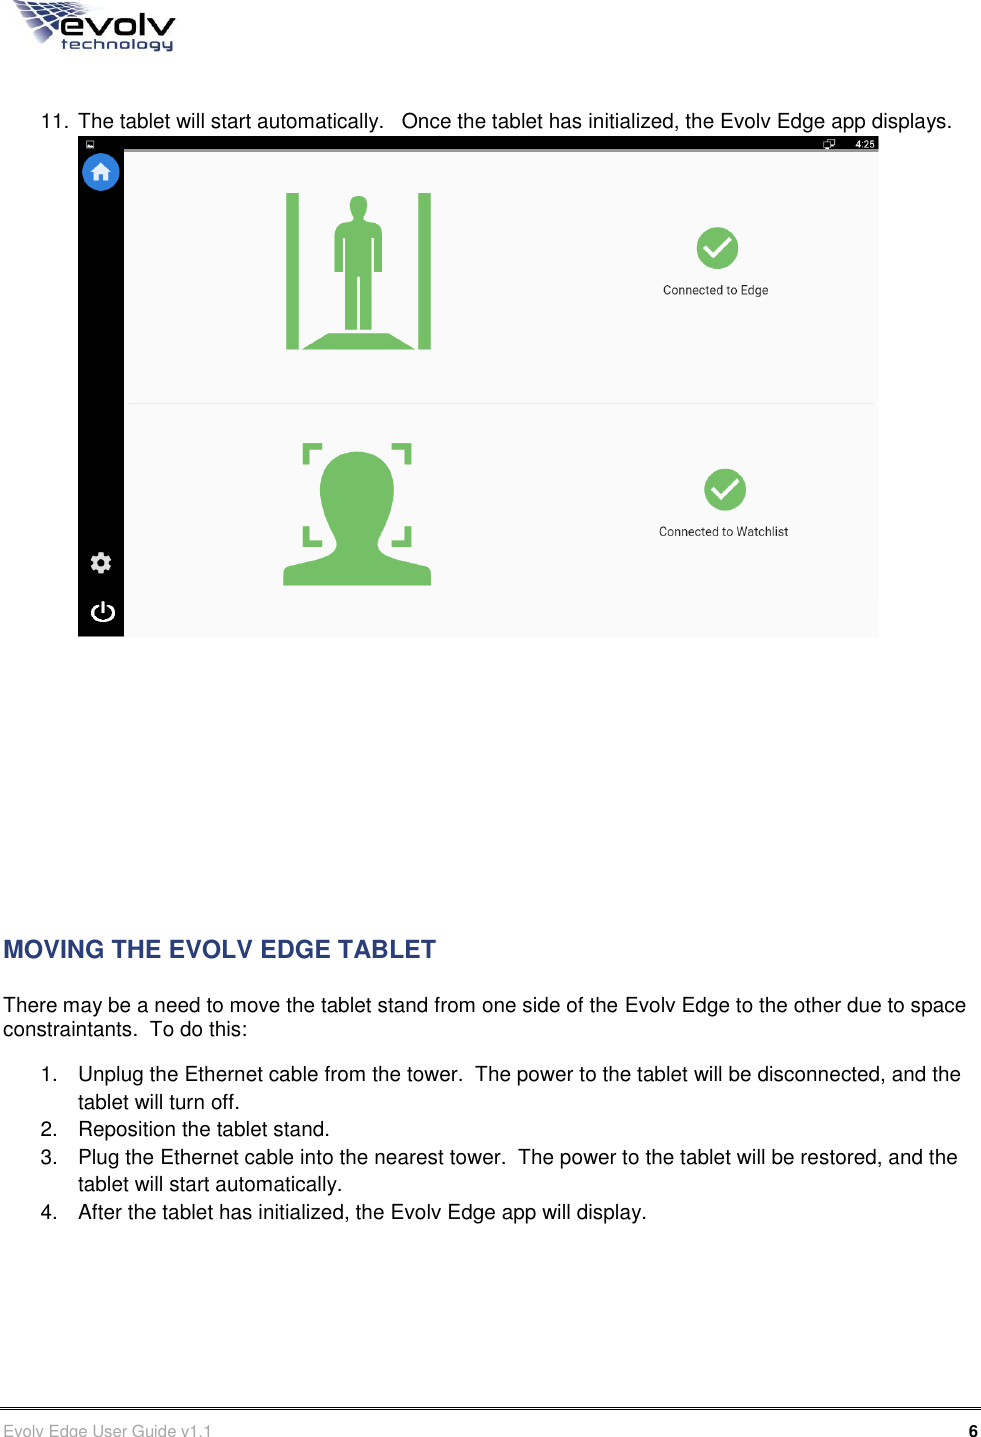      Evolv Edge User Guide v1.1      6 Part Number: 500-00003  11. The tablet will start automatically.   Once the tablet has initialized, the Evolv Edge app displays.           MOVING THE EVOLV EDGE TABLET There may be a need to move the tablet stand from one side of the Evolv Edge to the other due to space constraintants.  To do this: 1.  Unplug the Ethernet cable from the tower.  The power to the tablet will be disconnected, and the tablet will turn off. 2.  Reposition the tablet stand. 3.  Plug the Ethernet cable into the nearest tower.  The power to the tablet will be restored, and the tablet will start automatically. 4.  After the tablet has initialized, the Evolv Edge app will display.    